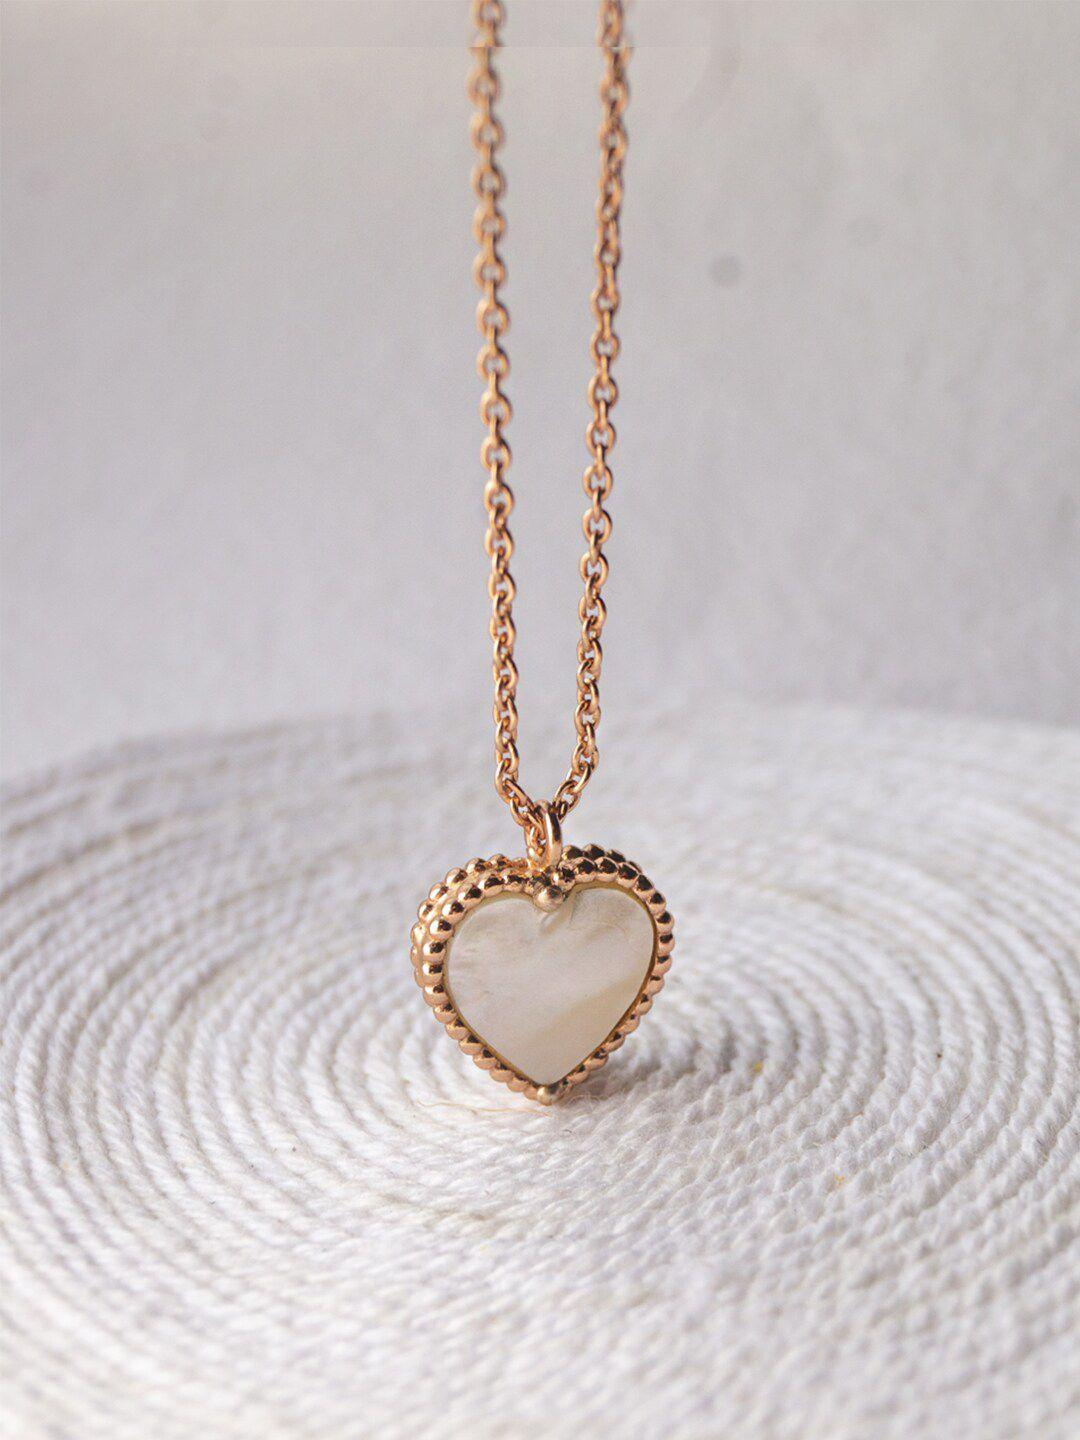 mannash rose gold & white 925 sterling silver rose gold-plated necklace